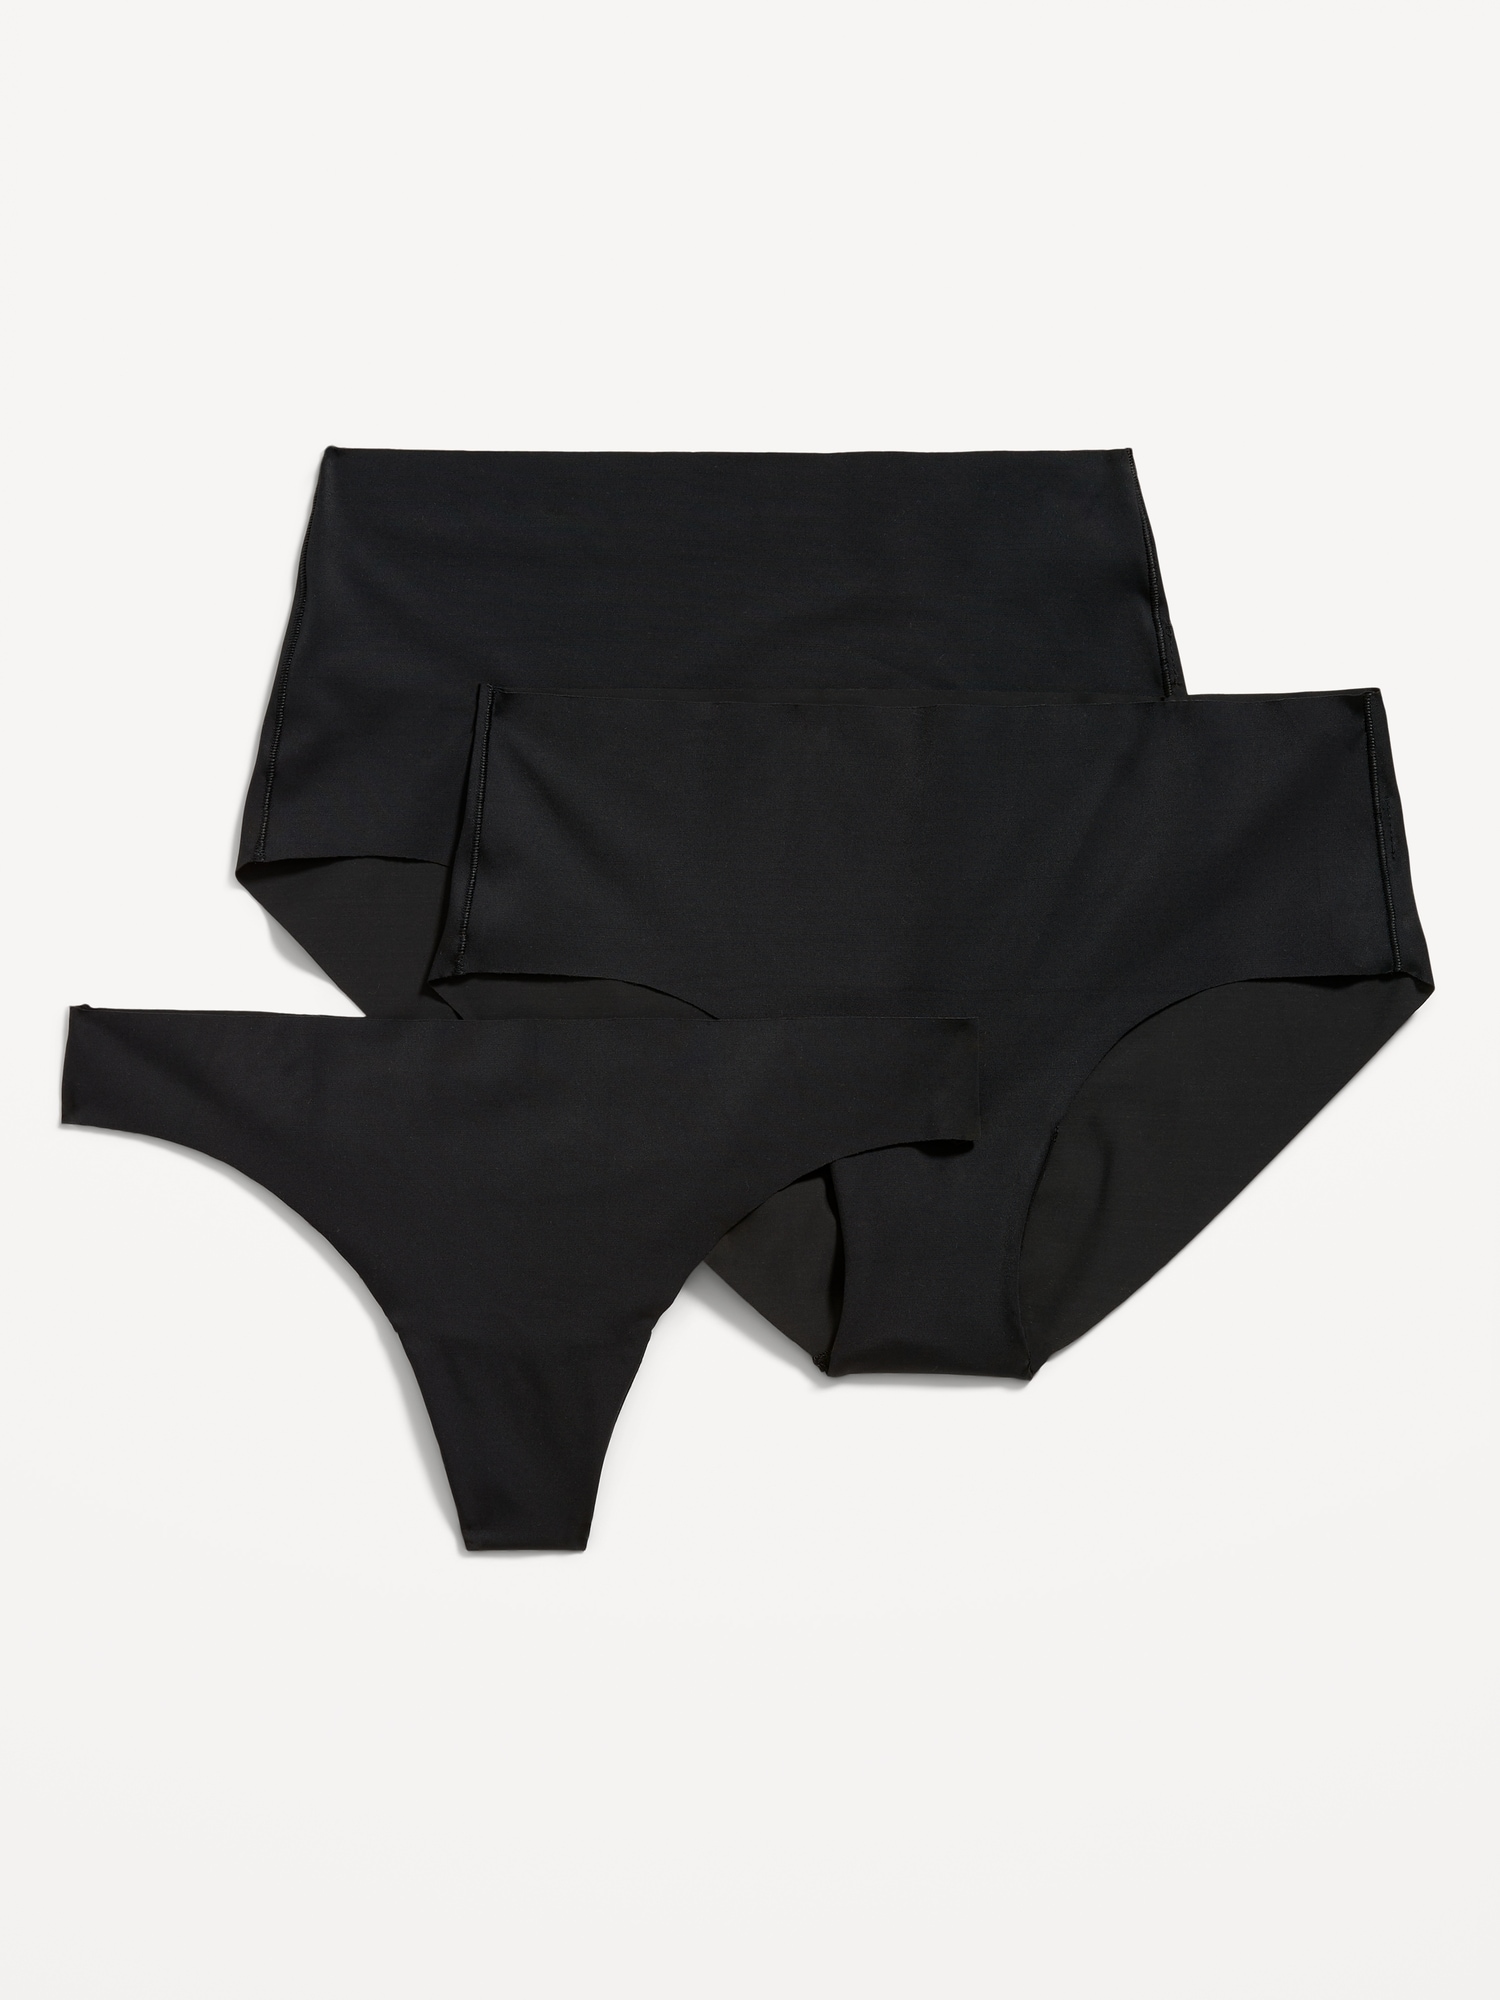 Old Navy - Soft-Knit No-Show Underwear Variety 3-Pack for Women black